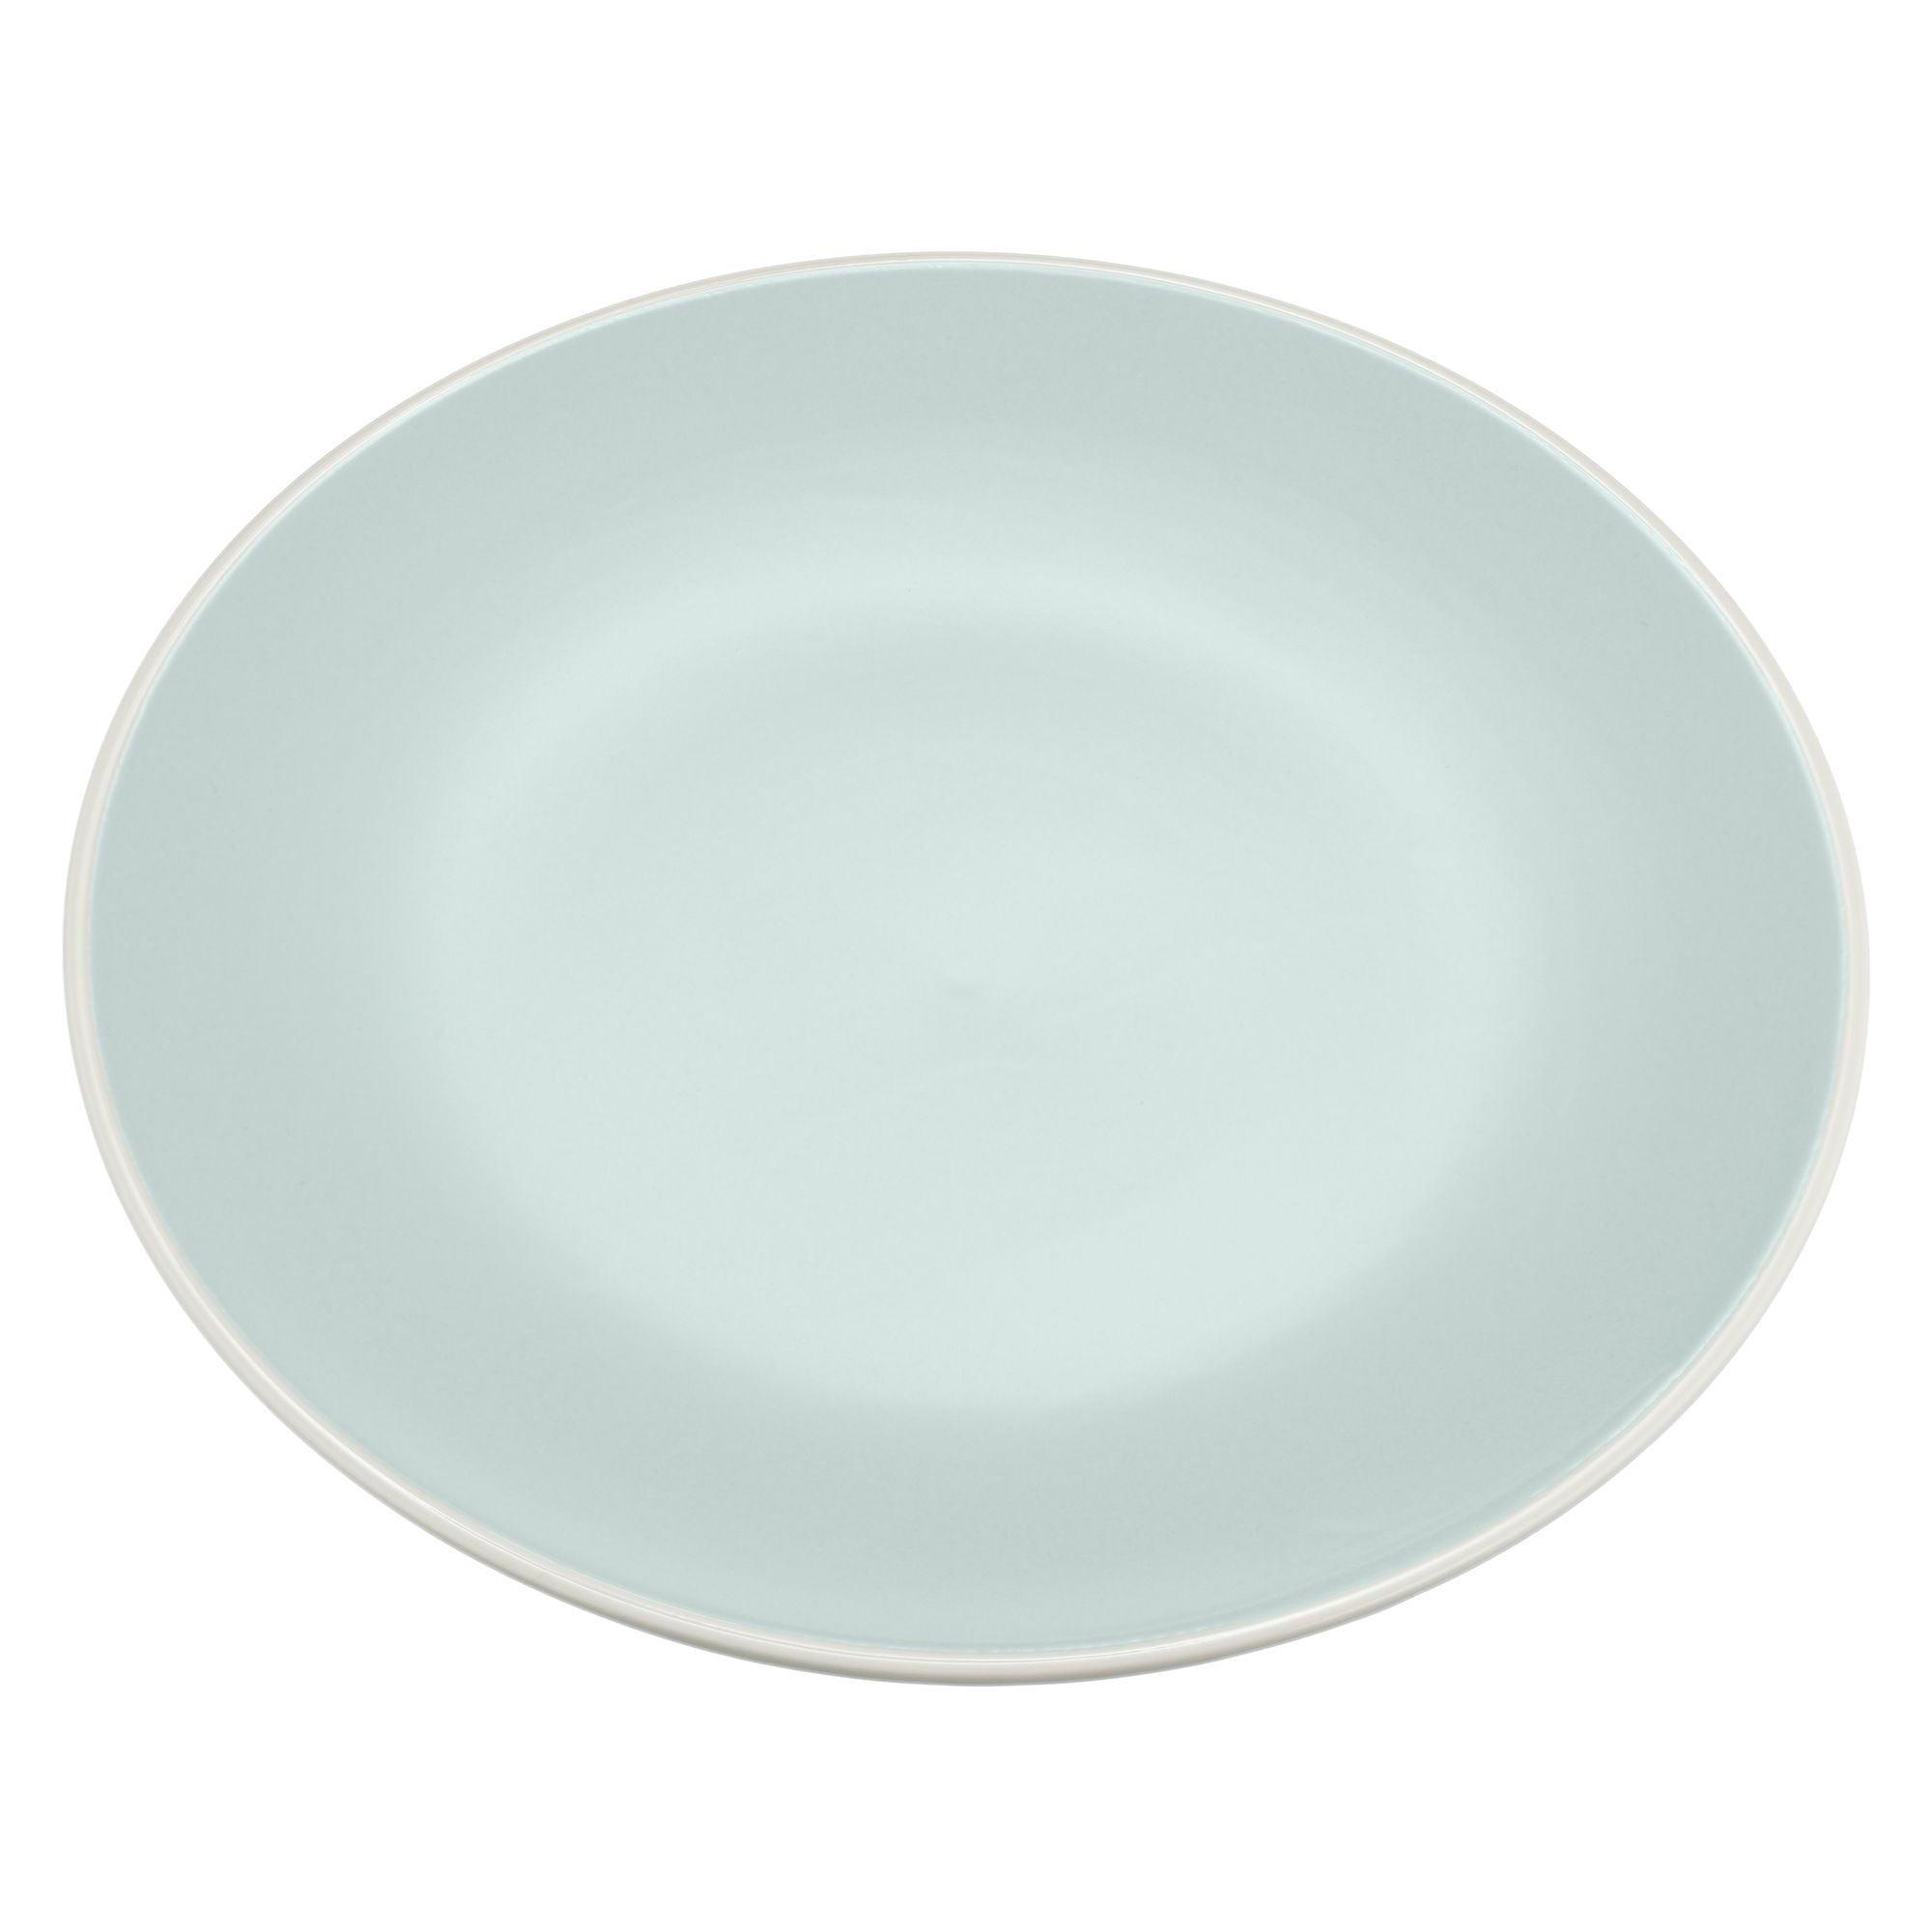 Green Dinner Plate from China Blue